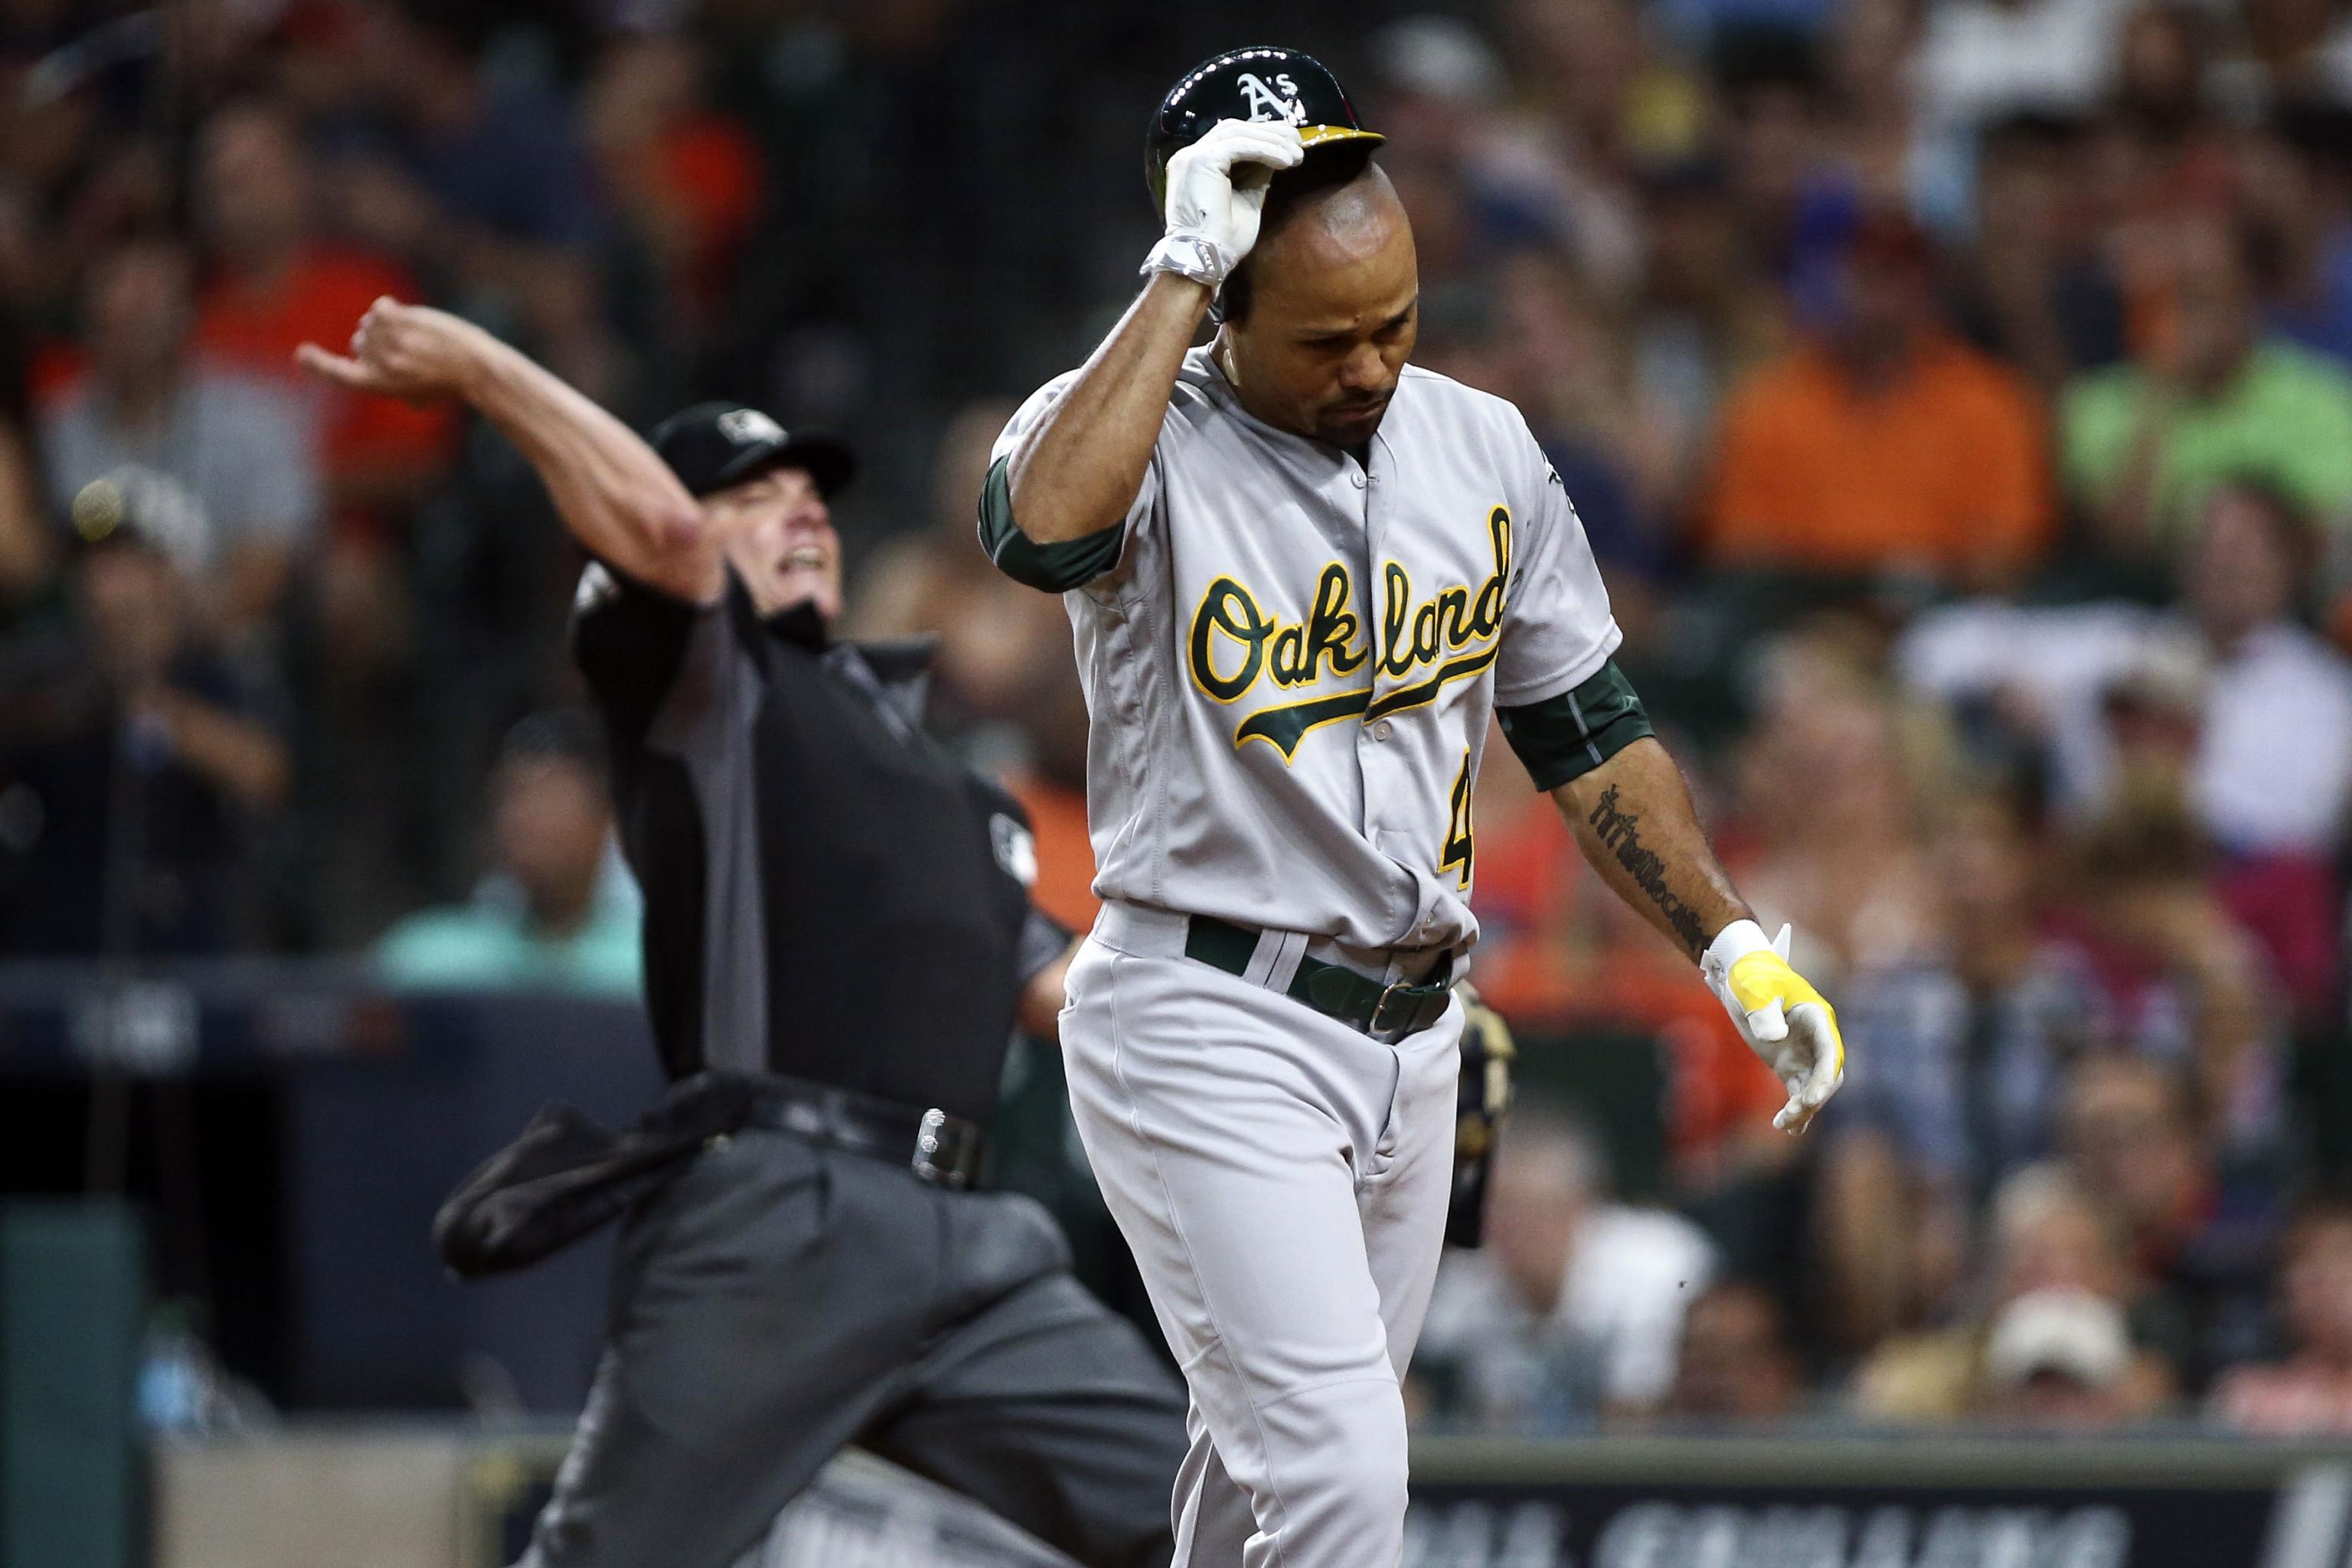 A's Outfielder Coco Crisp Sports Absurdly Awesome New Haircut